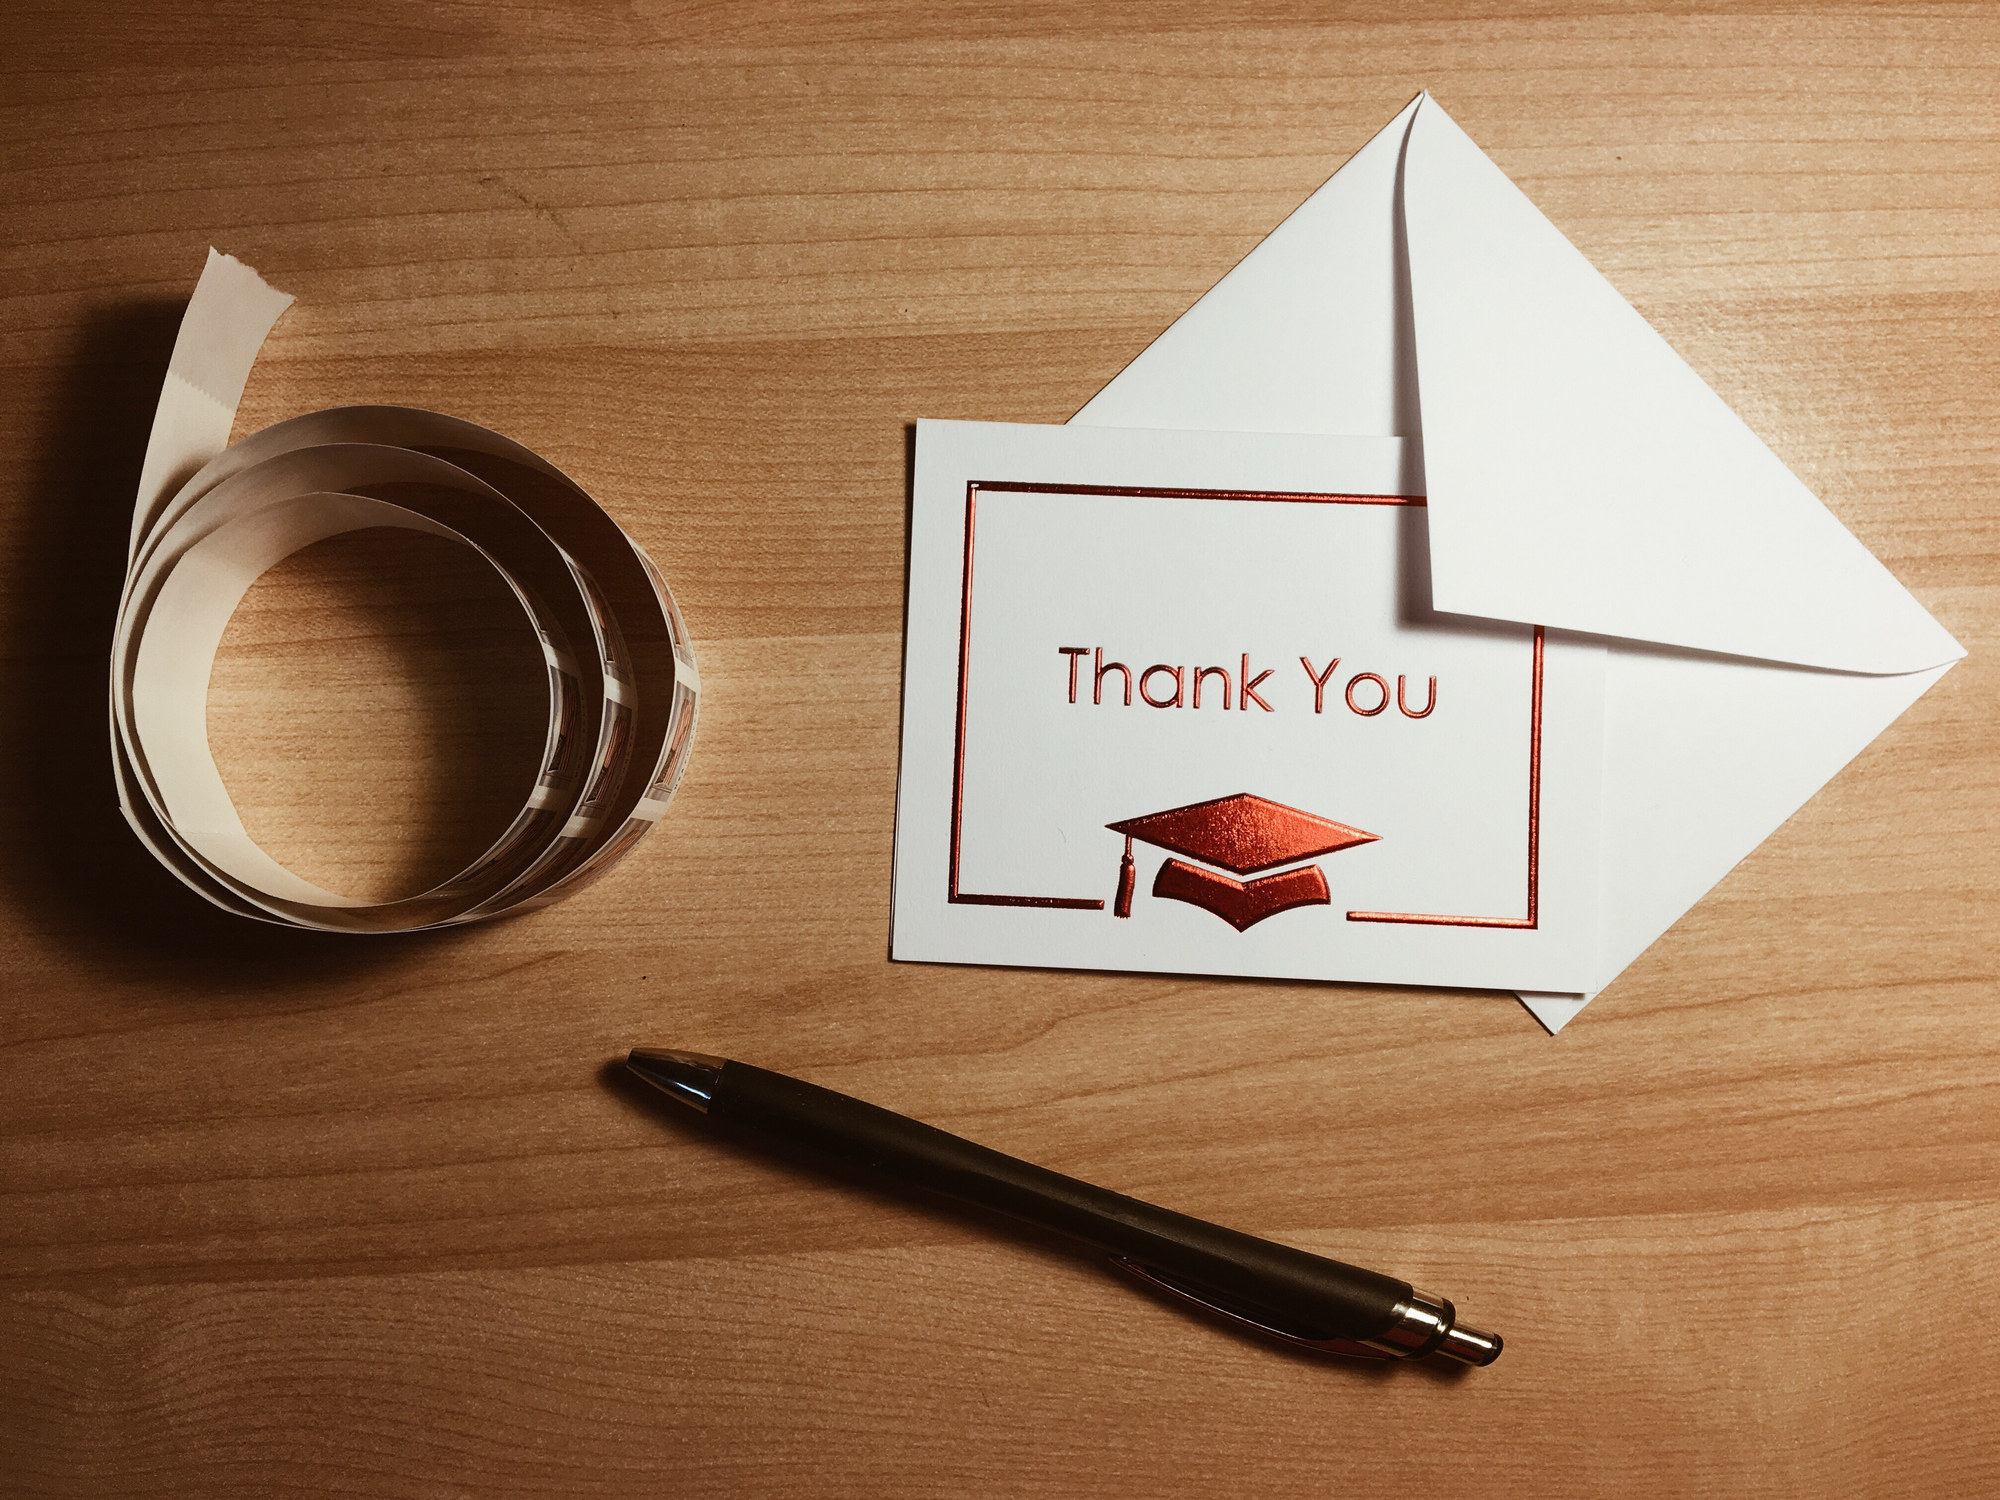 A thank you card with a graduation cap on the front with a roll of stamps and pen